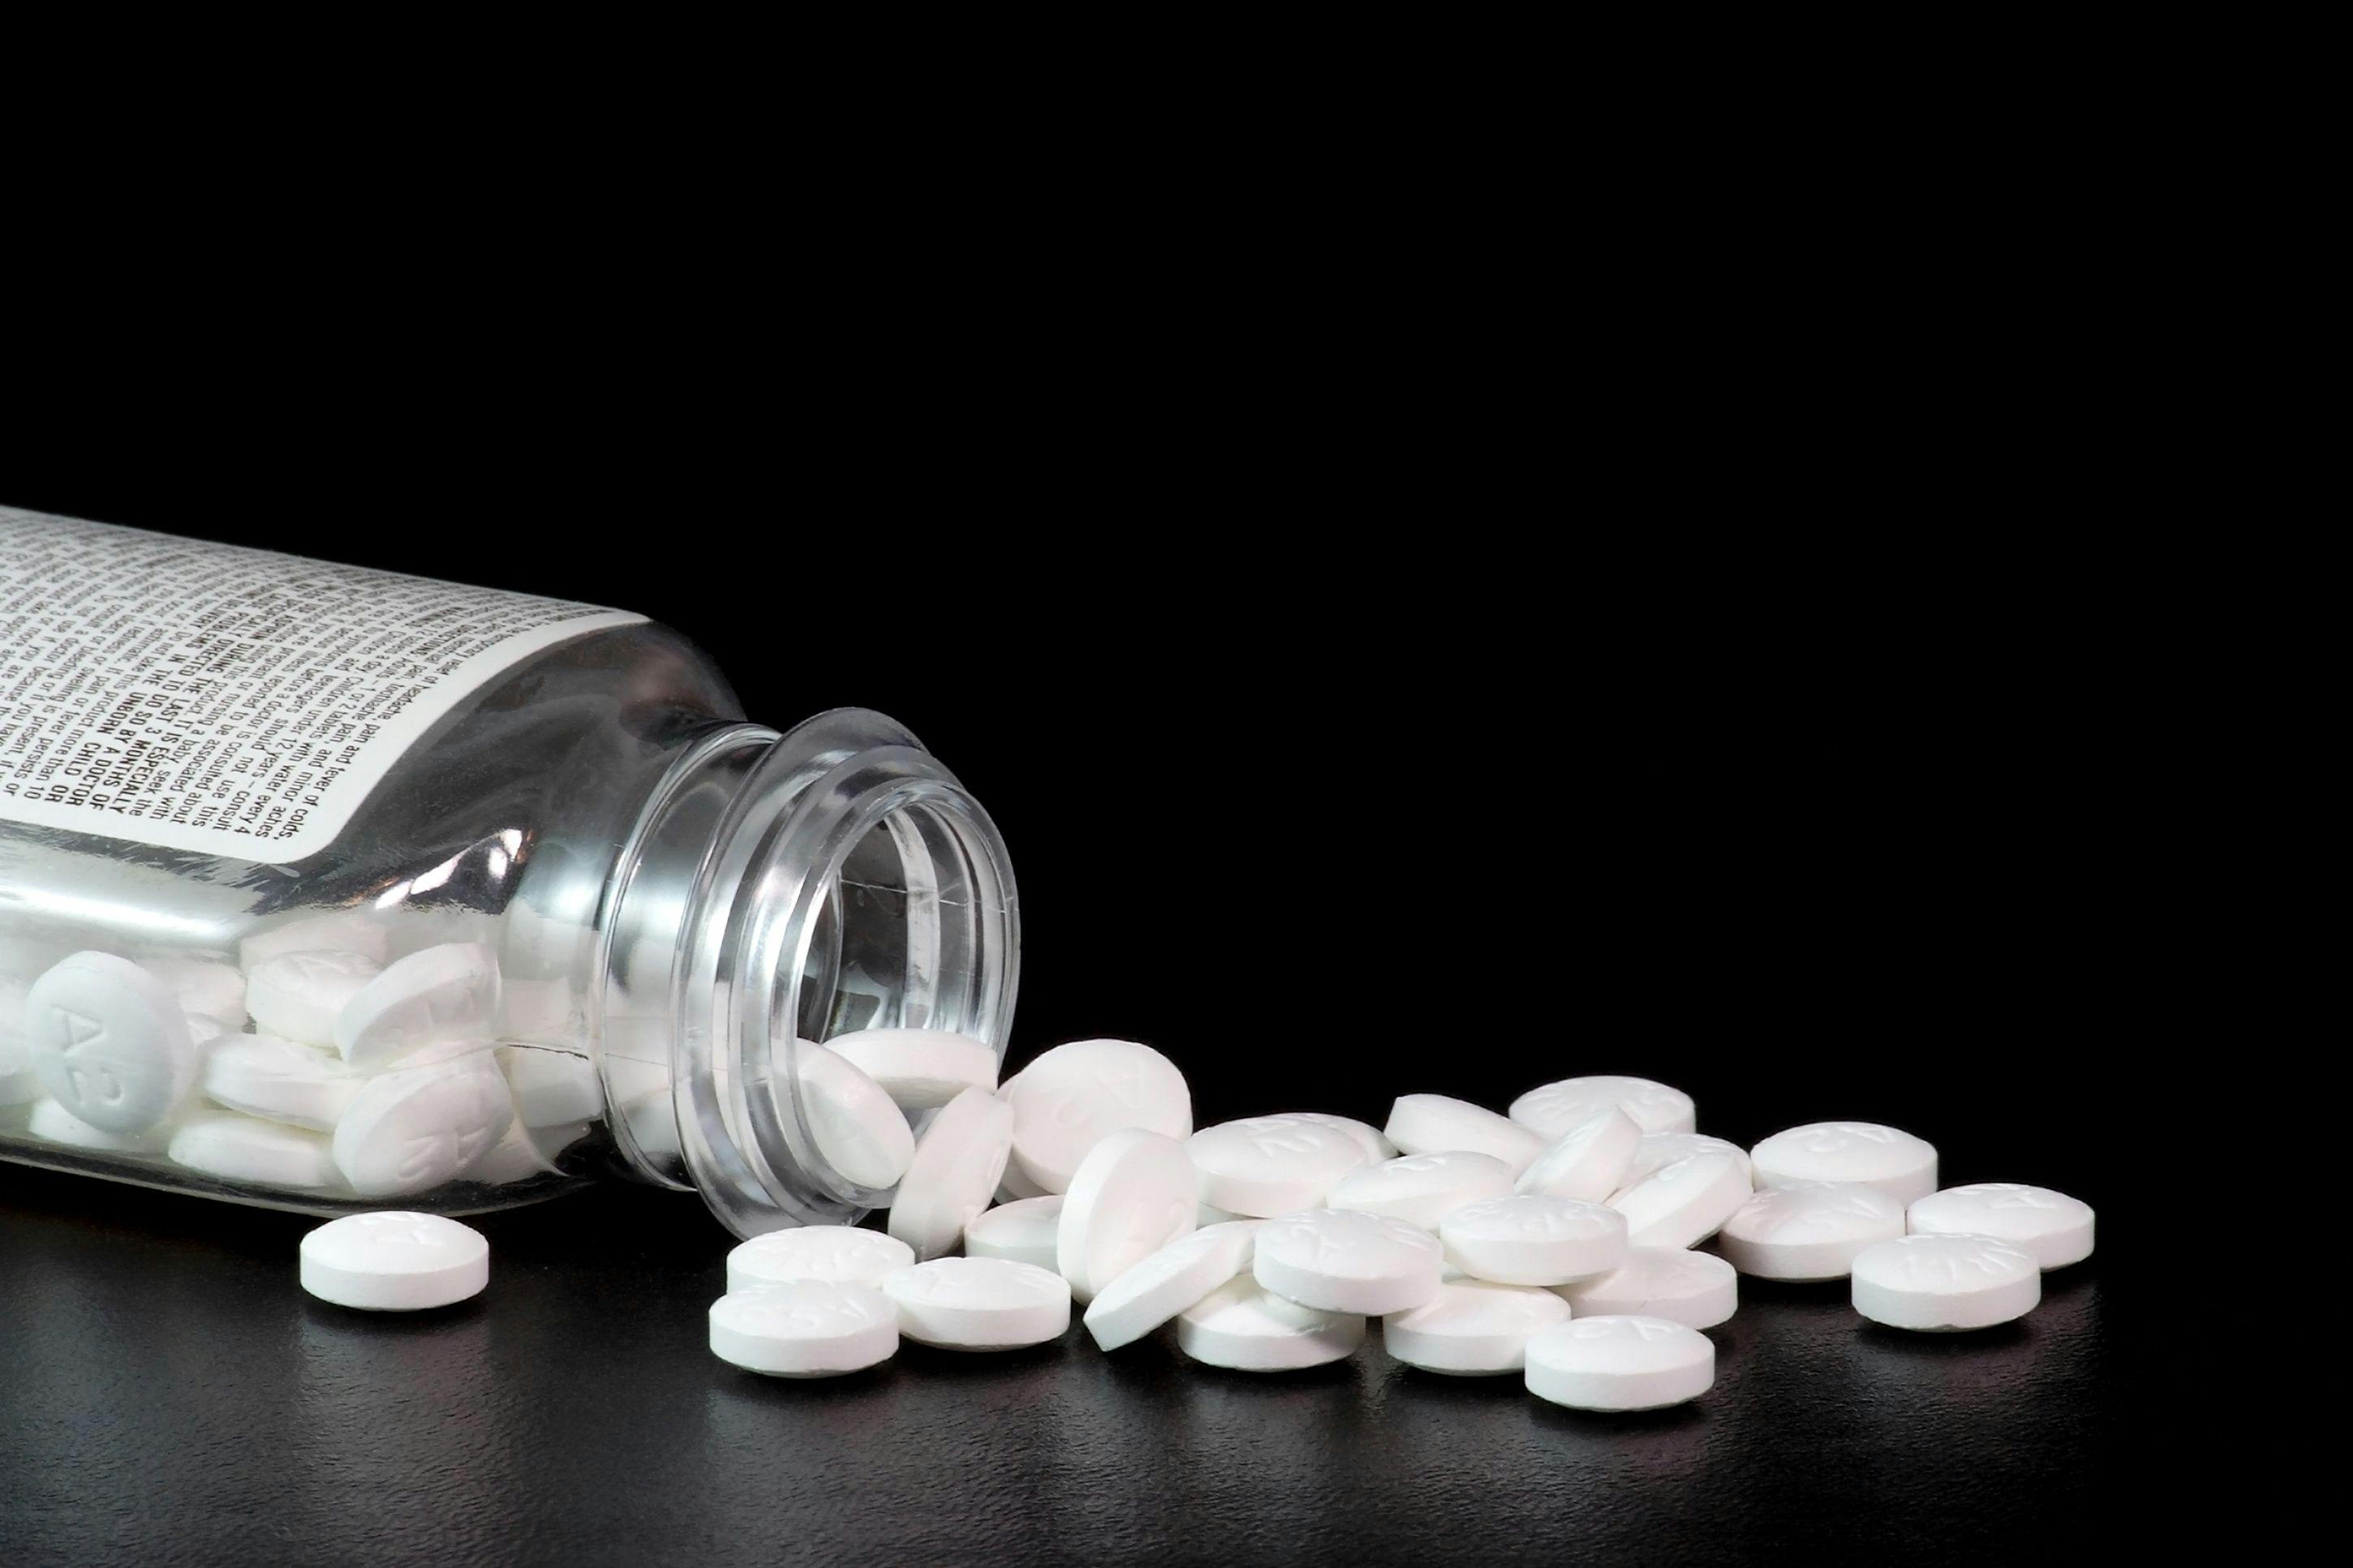 CAC Scoring Helps Determine Net Benefit or Harm of Aspirin in Primary Prevention